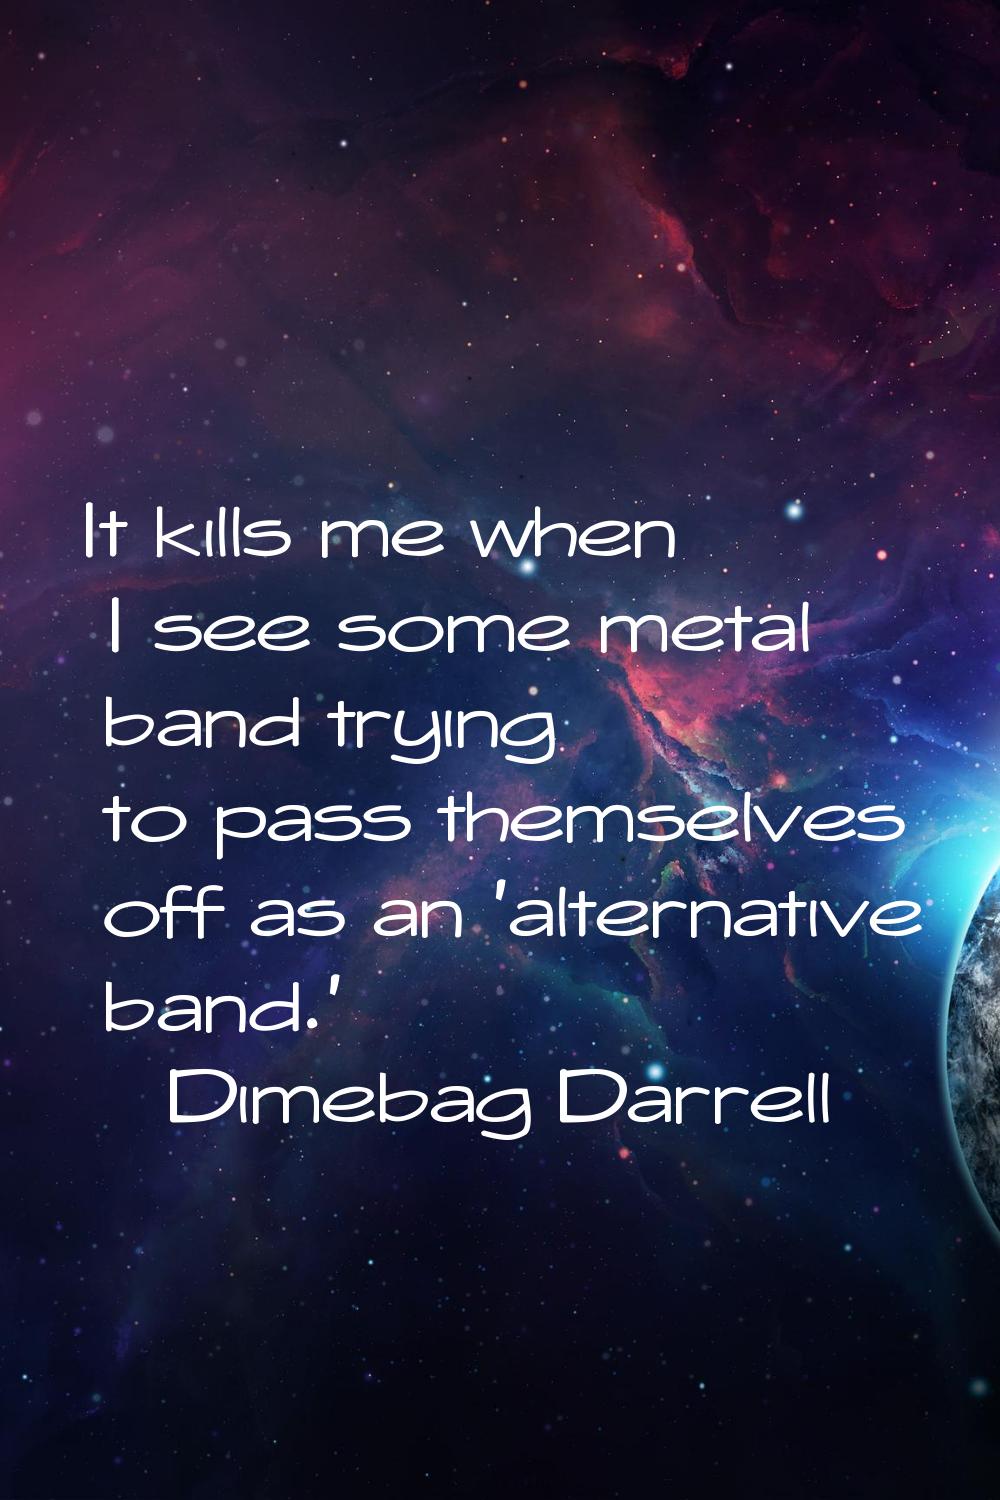 It kills me when I see some metal band trying to pass themselves off as an 'alternative band.'